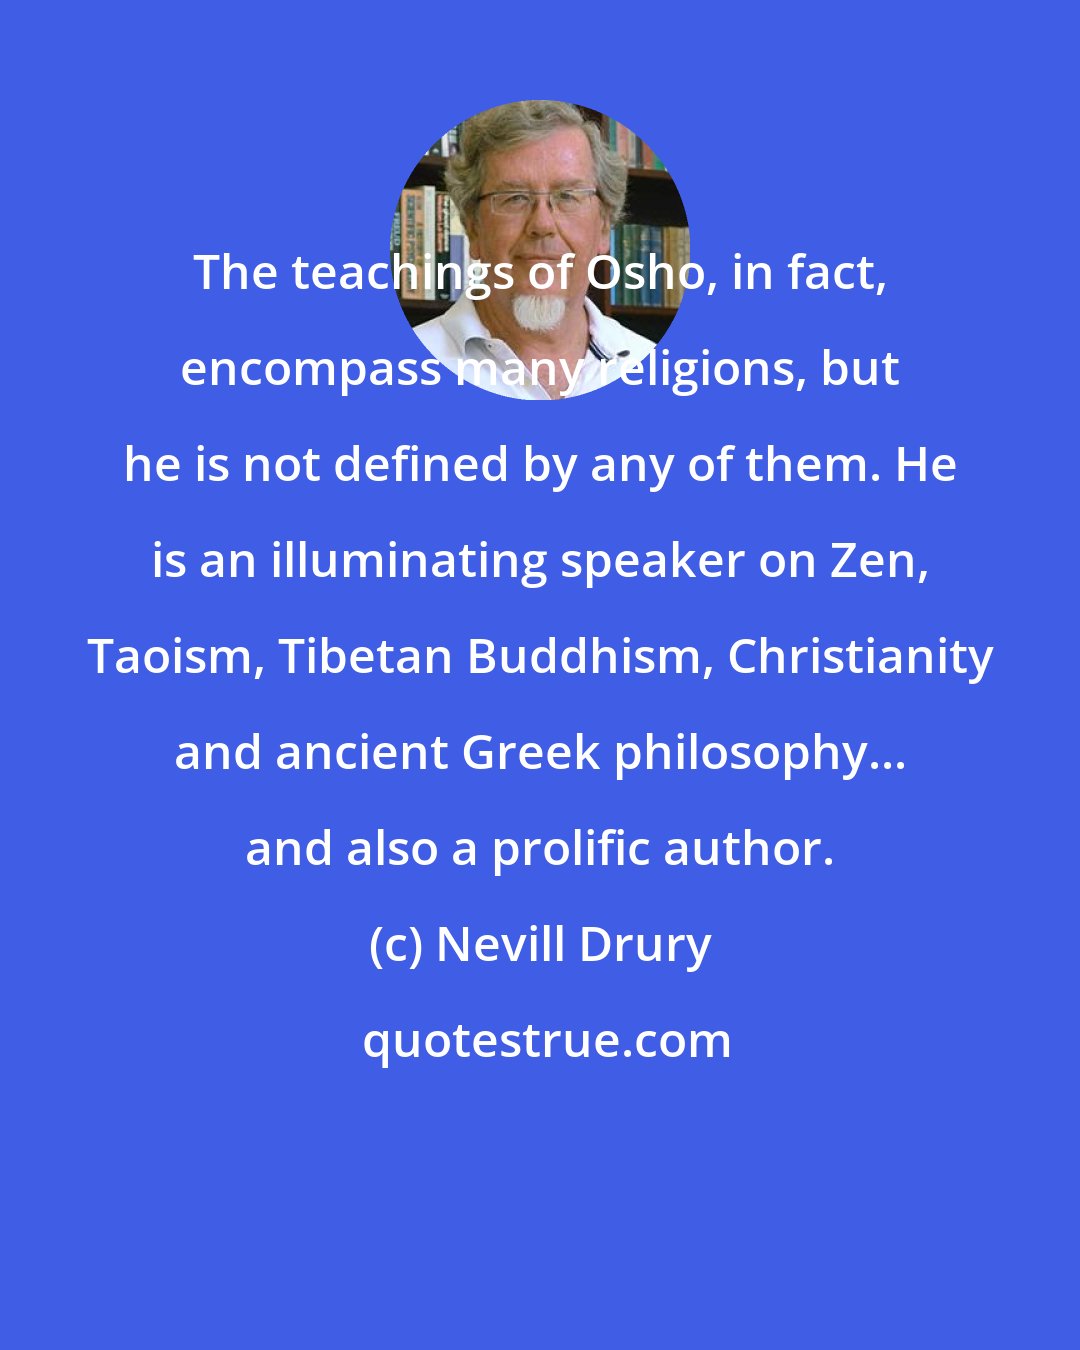 Nevill Drury: The teachings of Osho, in fact, encompass many religions, but he is not defined by any of them. He is an illuminating speaker on Zen, Taoism, Tibetan Buddhism, Christianity and ancient Greek philosophy... and also a prolific author.